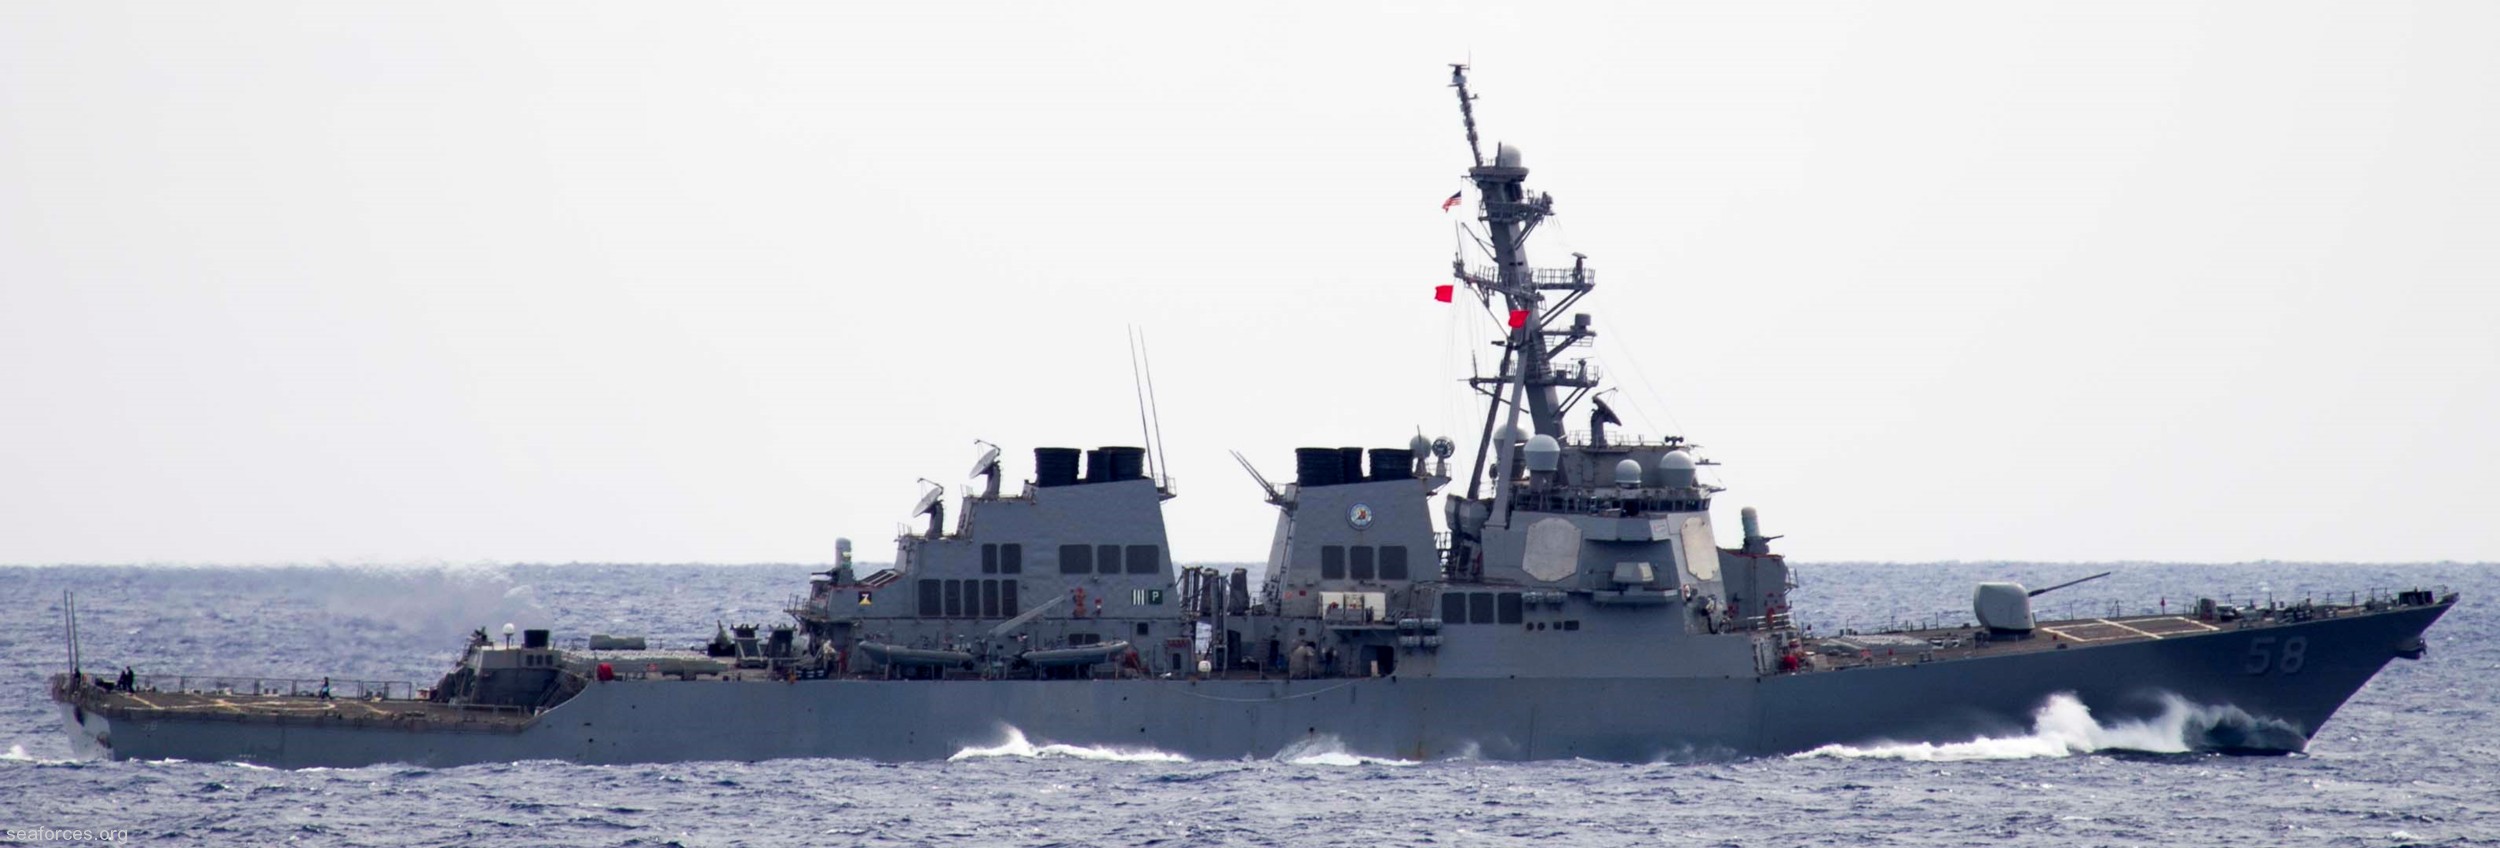 ddg-58 uss laboon guided missile destroyer us navy 08